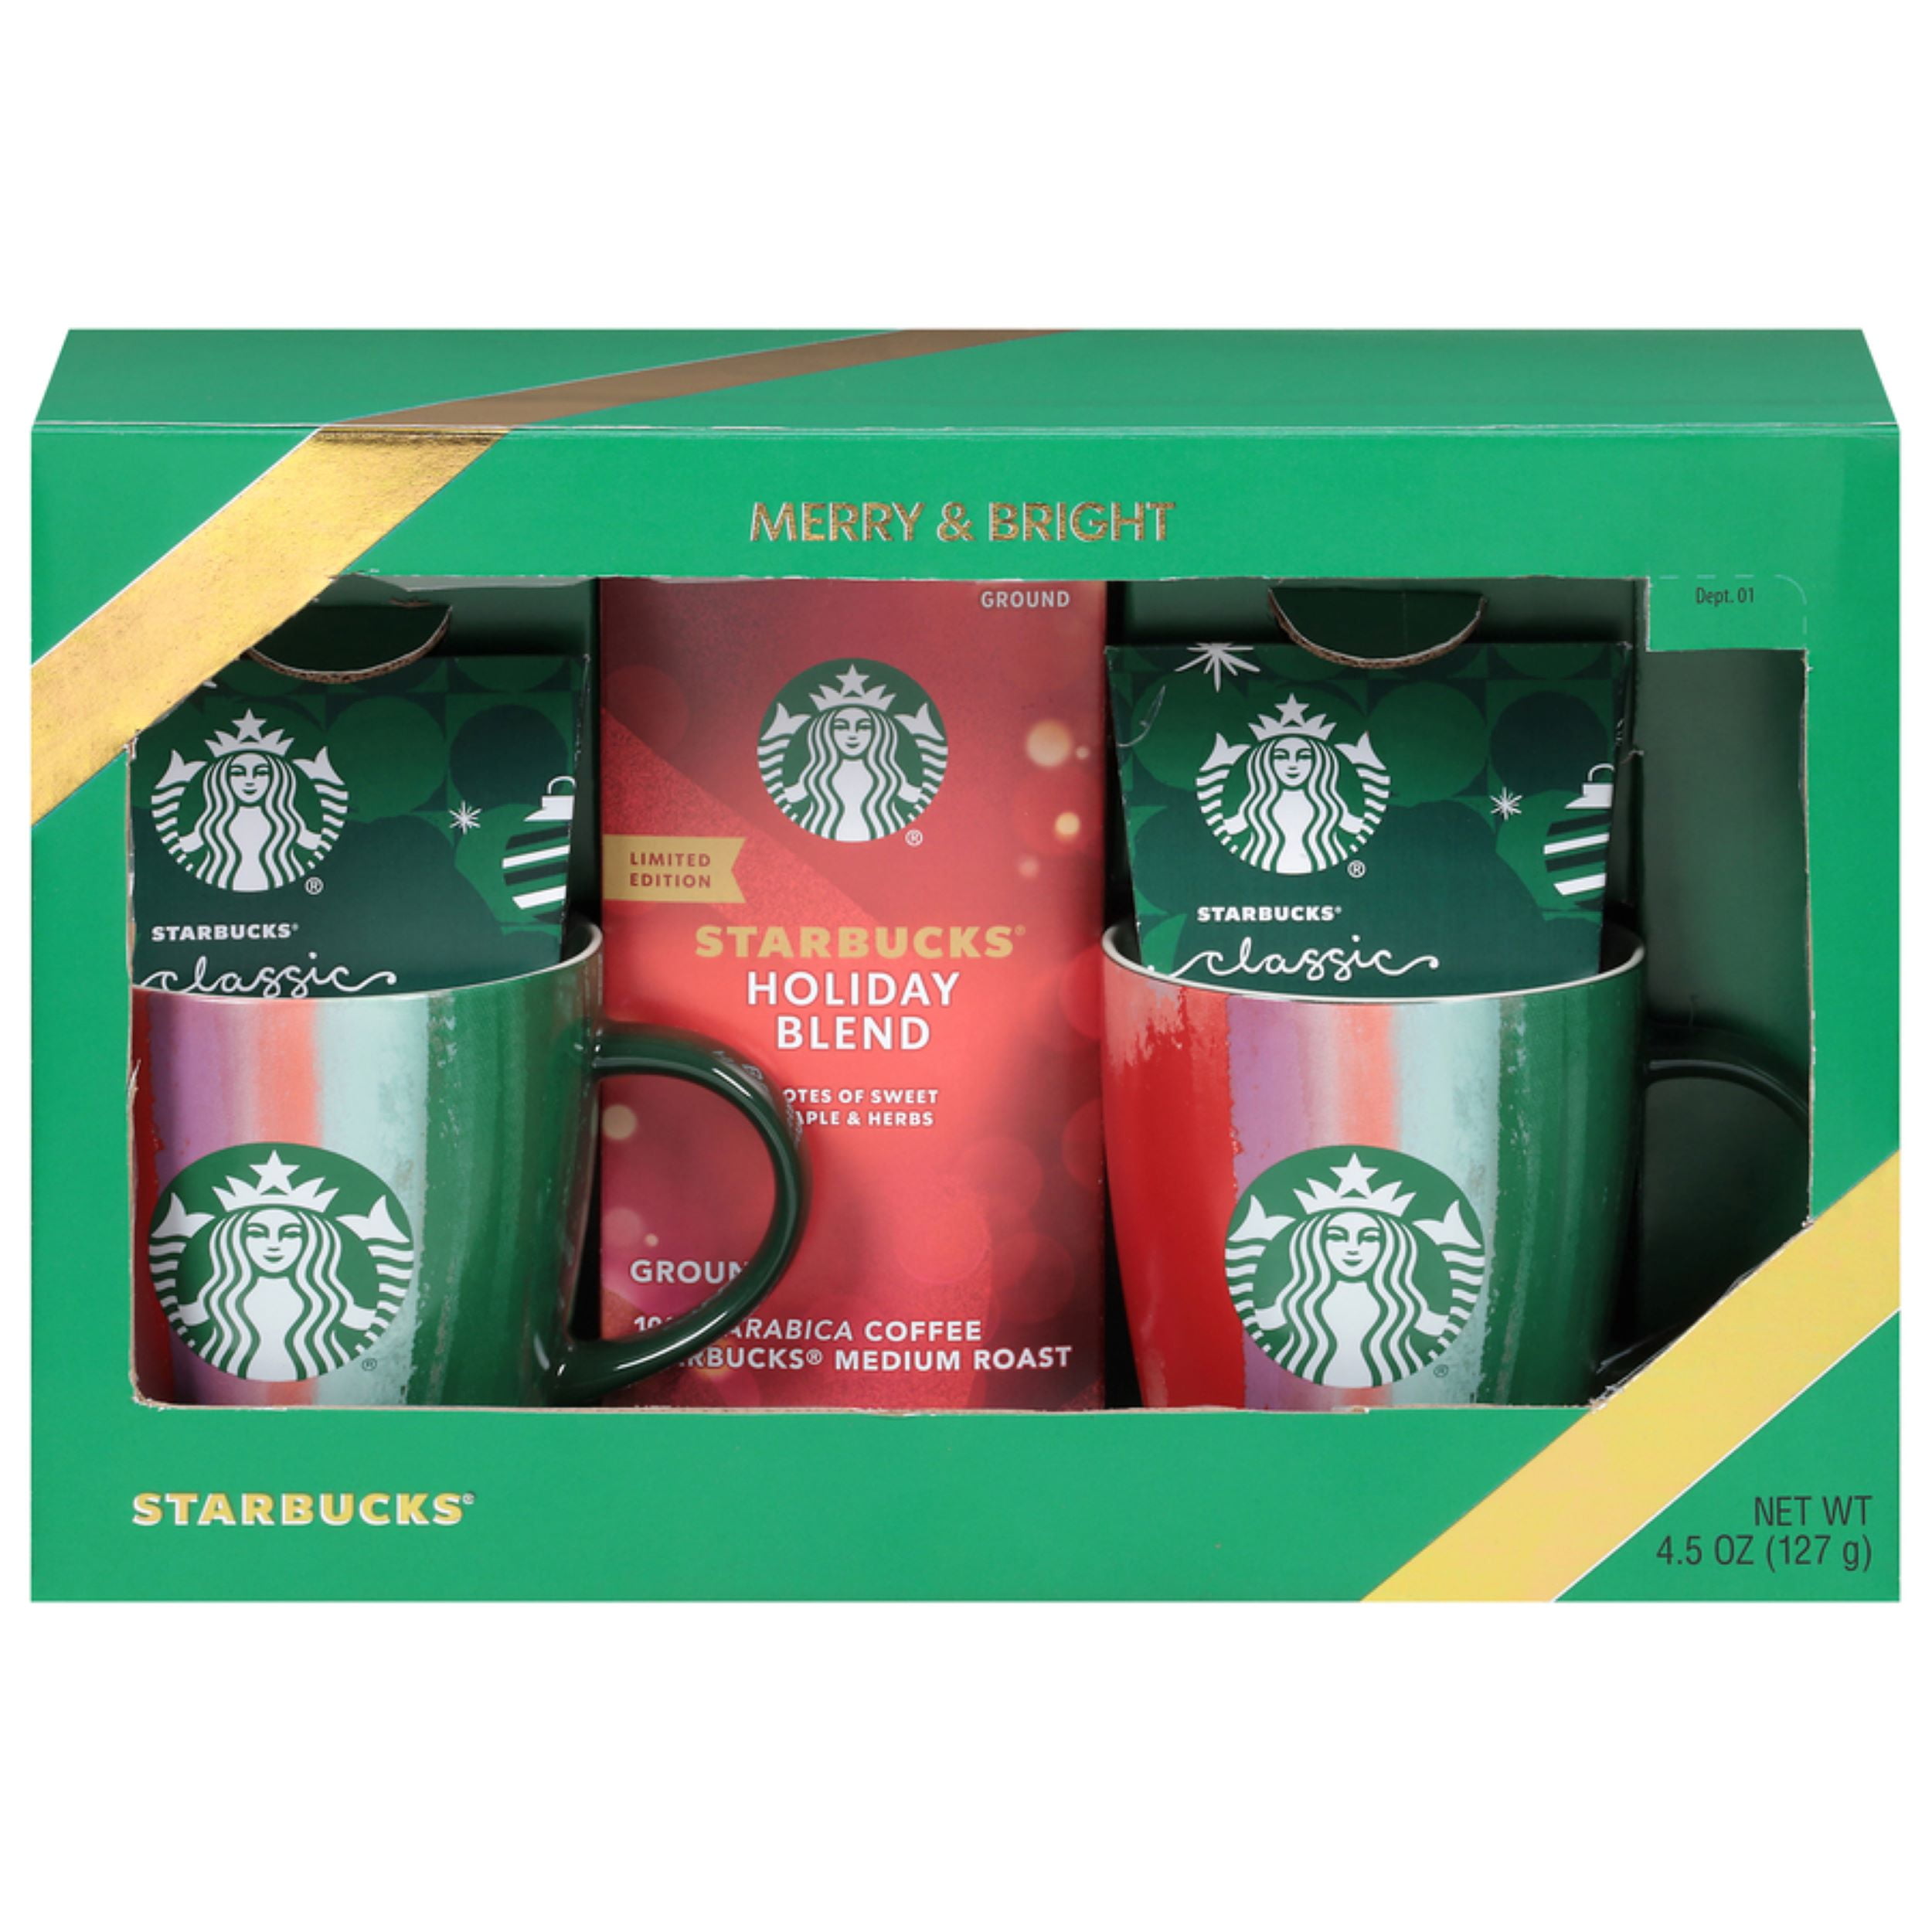 Merry and Bright Starbucks  Holiday Gift Pack with Ceramic mugs, Starbucks Classic Hot Cocoa and Starbucks Holiday Blend Coffee